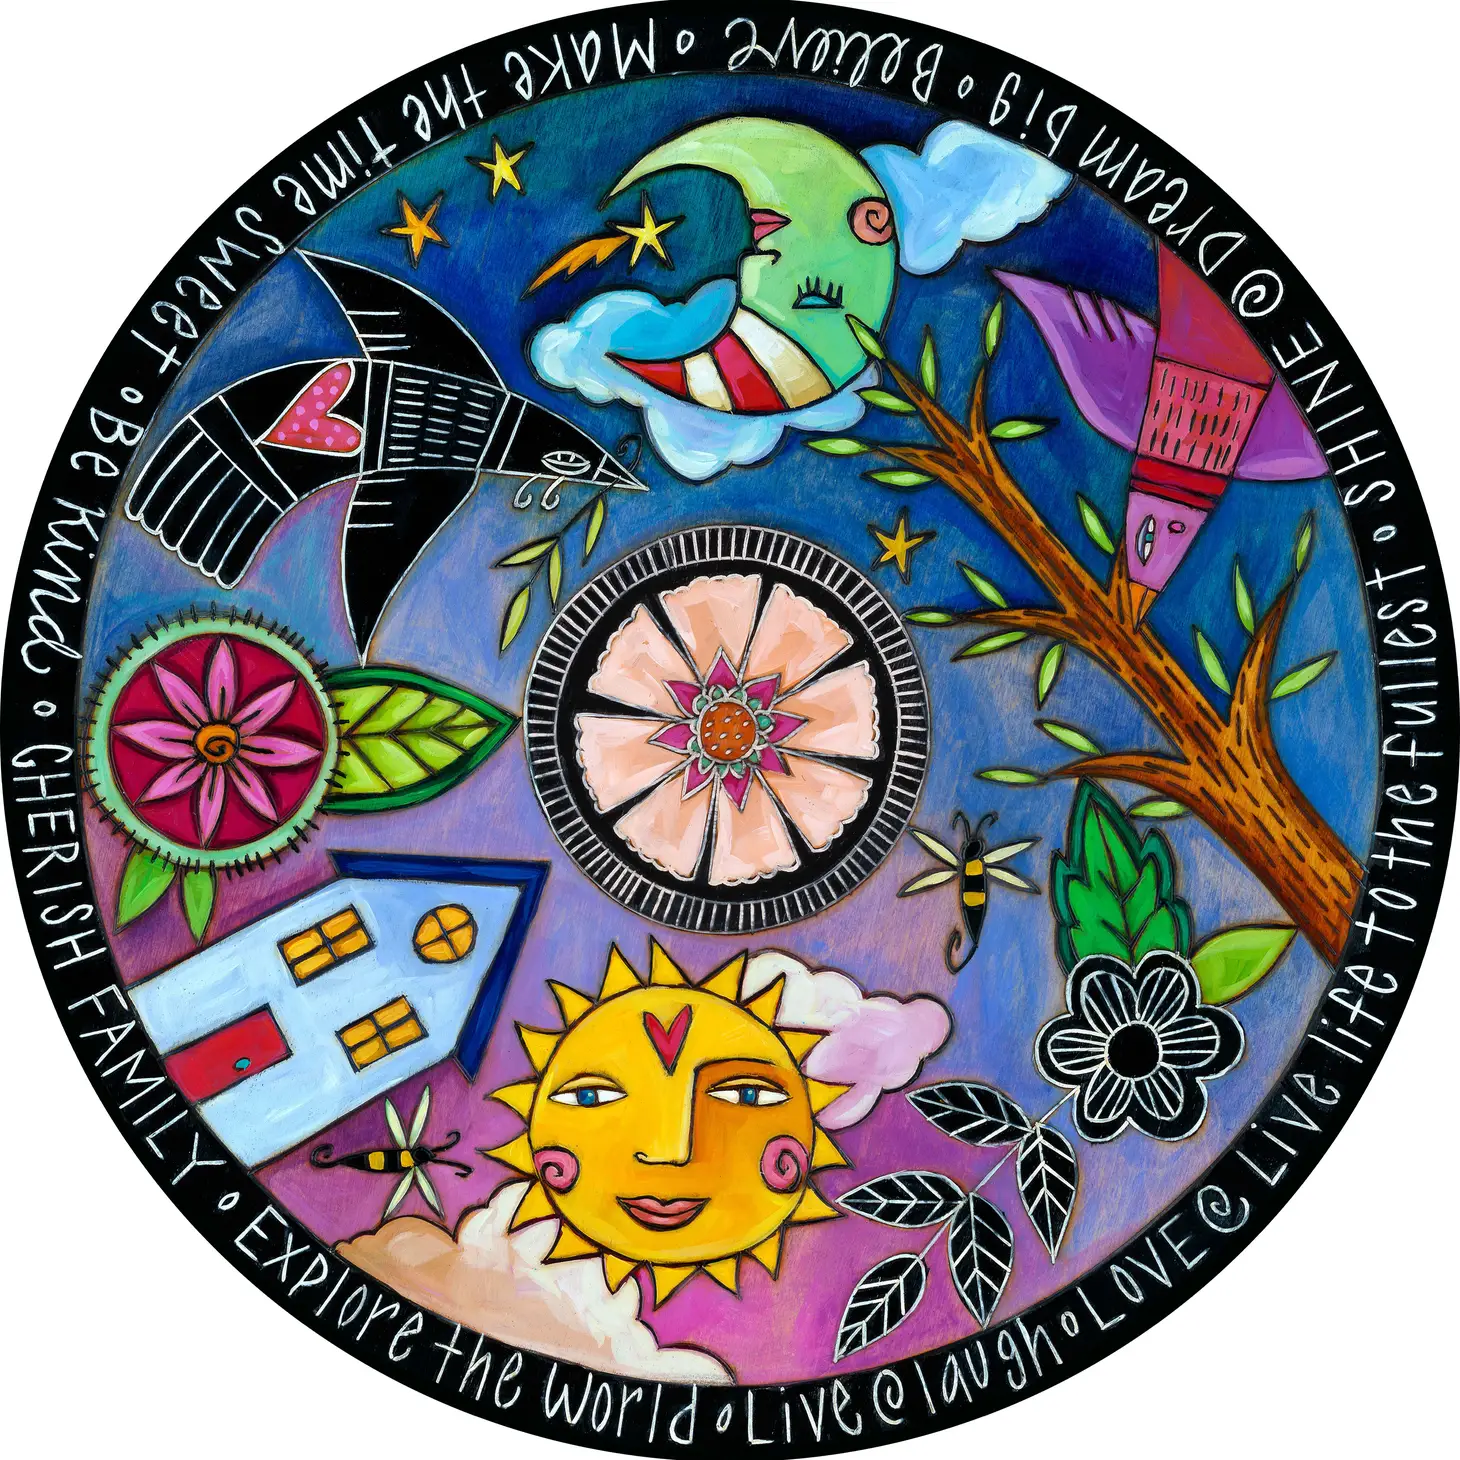 dream in color lazy susan sincerely sticks handmade art for kitchen and table printed from original artwork, 18 inches in black with purples and blues words live life to the fullest, shine, live, explore the world and more around the edge at Hanni gallery 